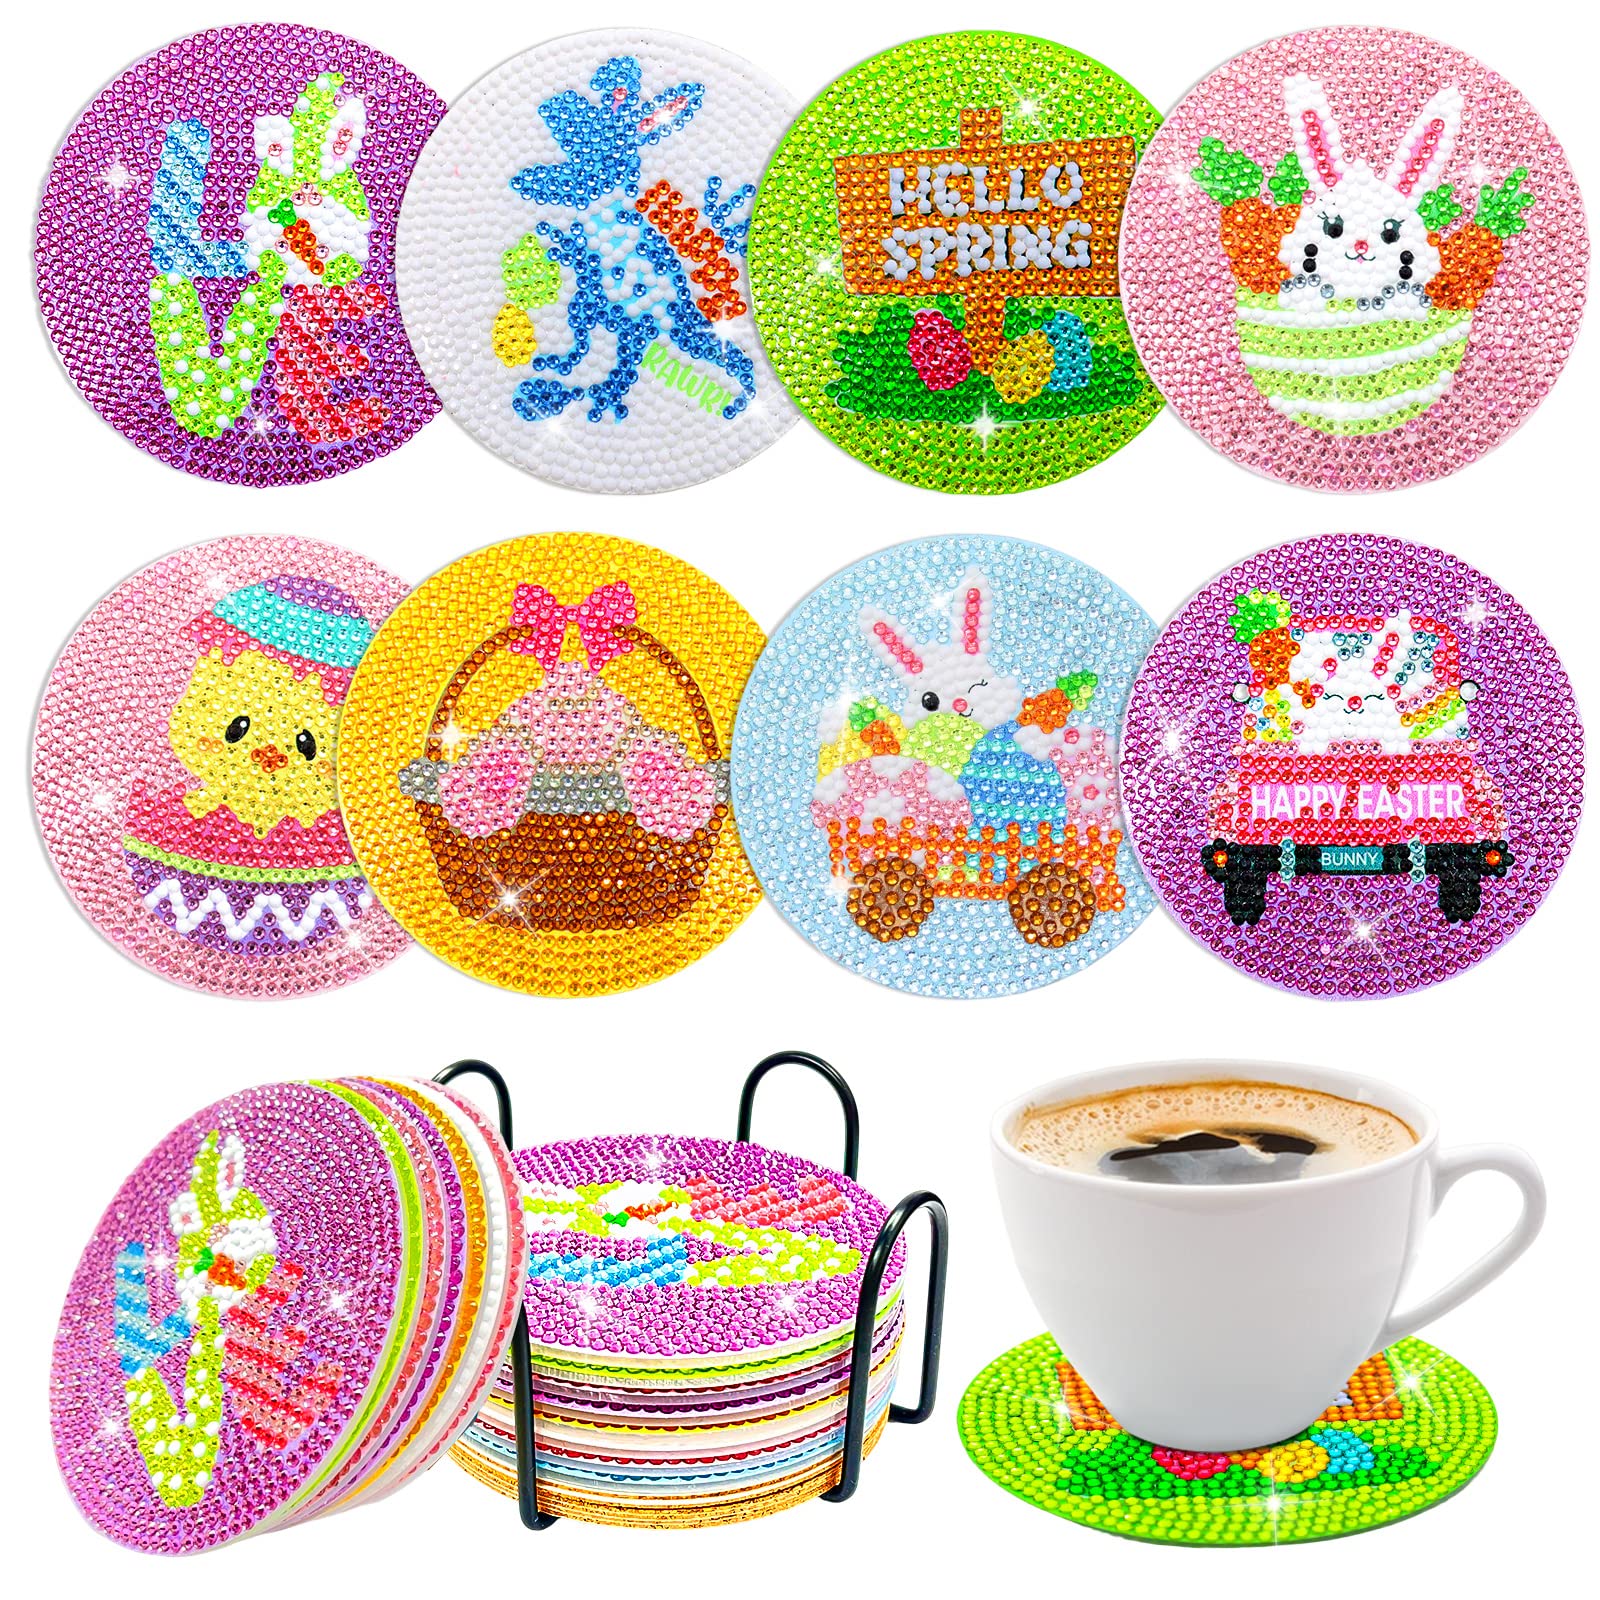 Mczan 8 Pcs Easter Diamond Painting Coasters with Holder Coasters